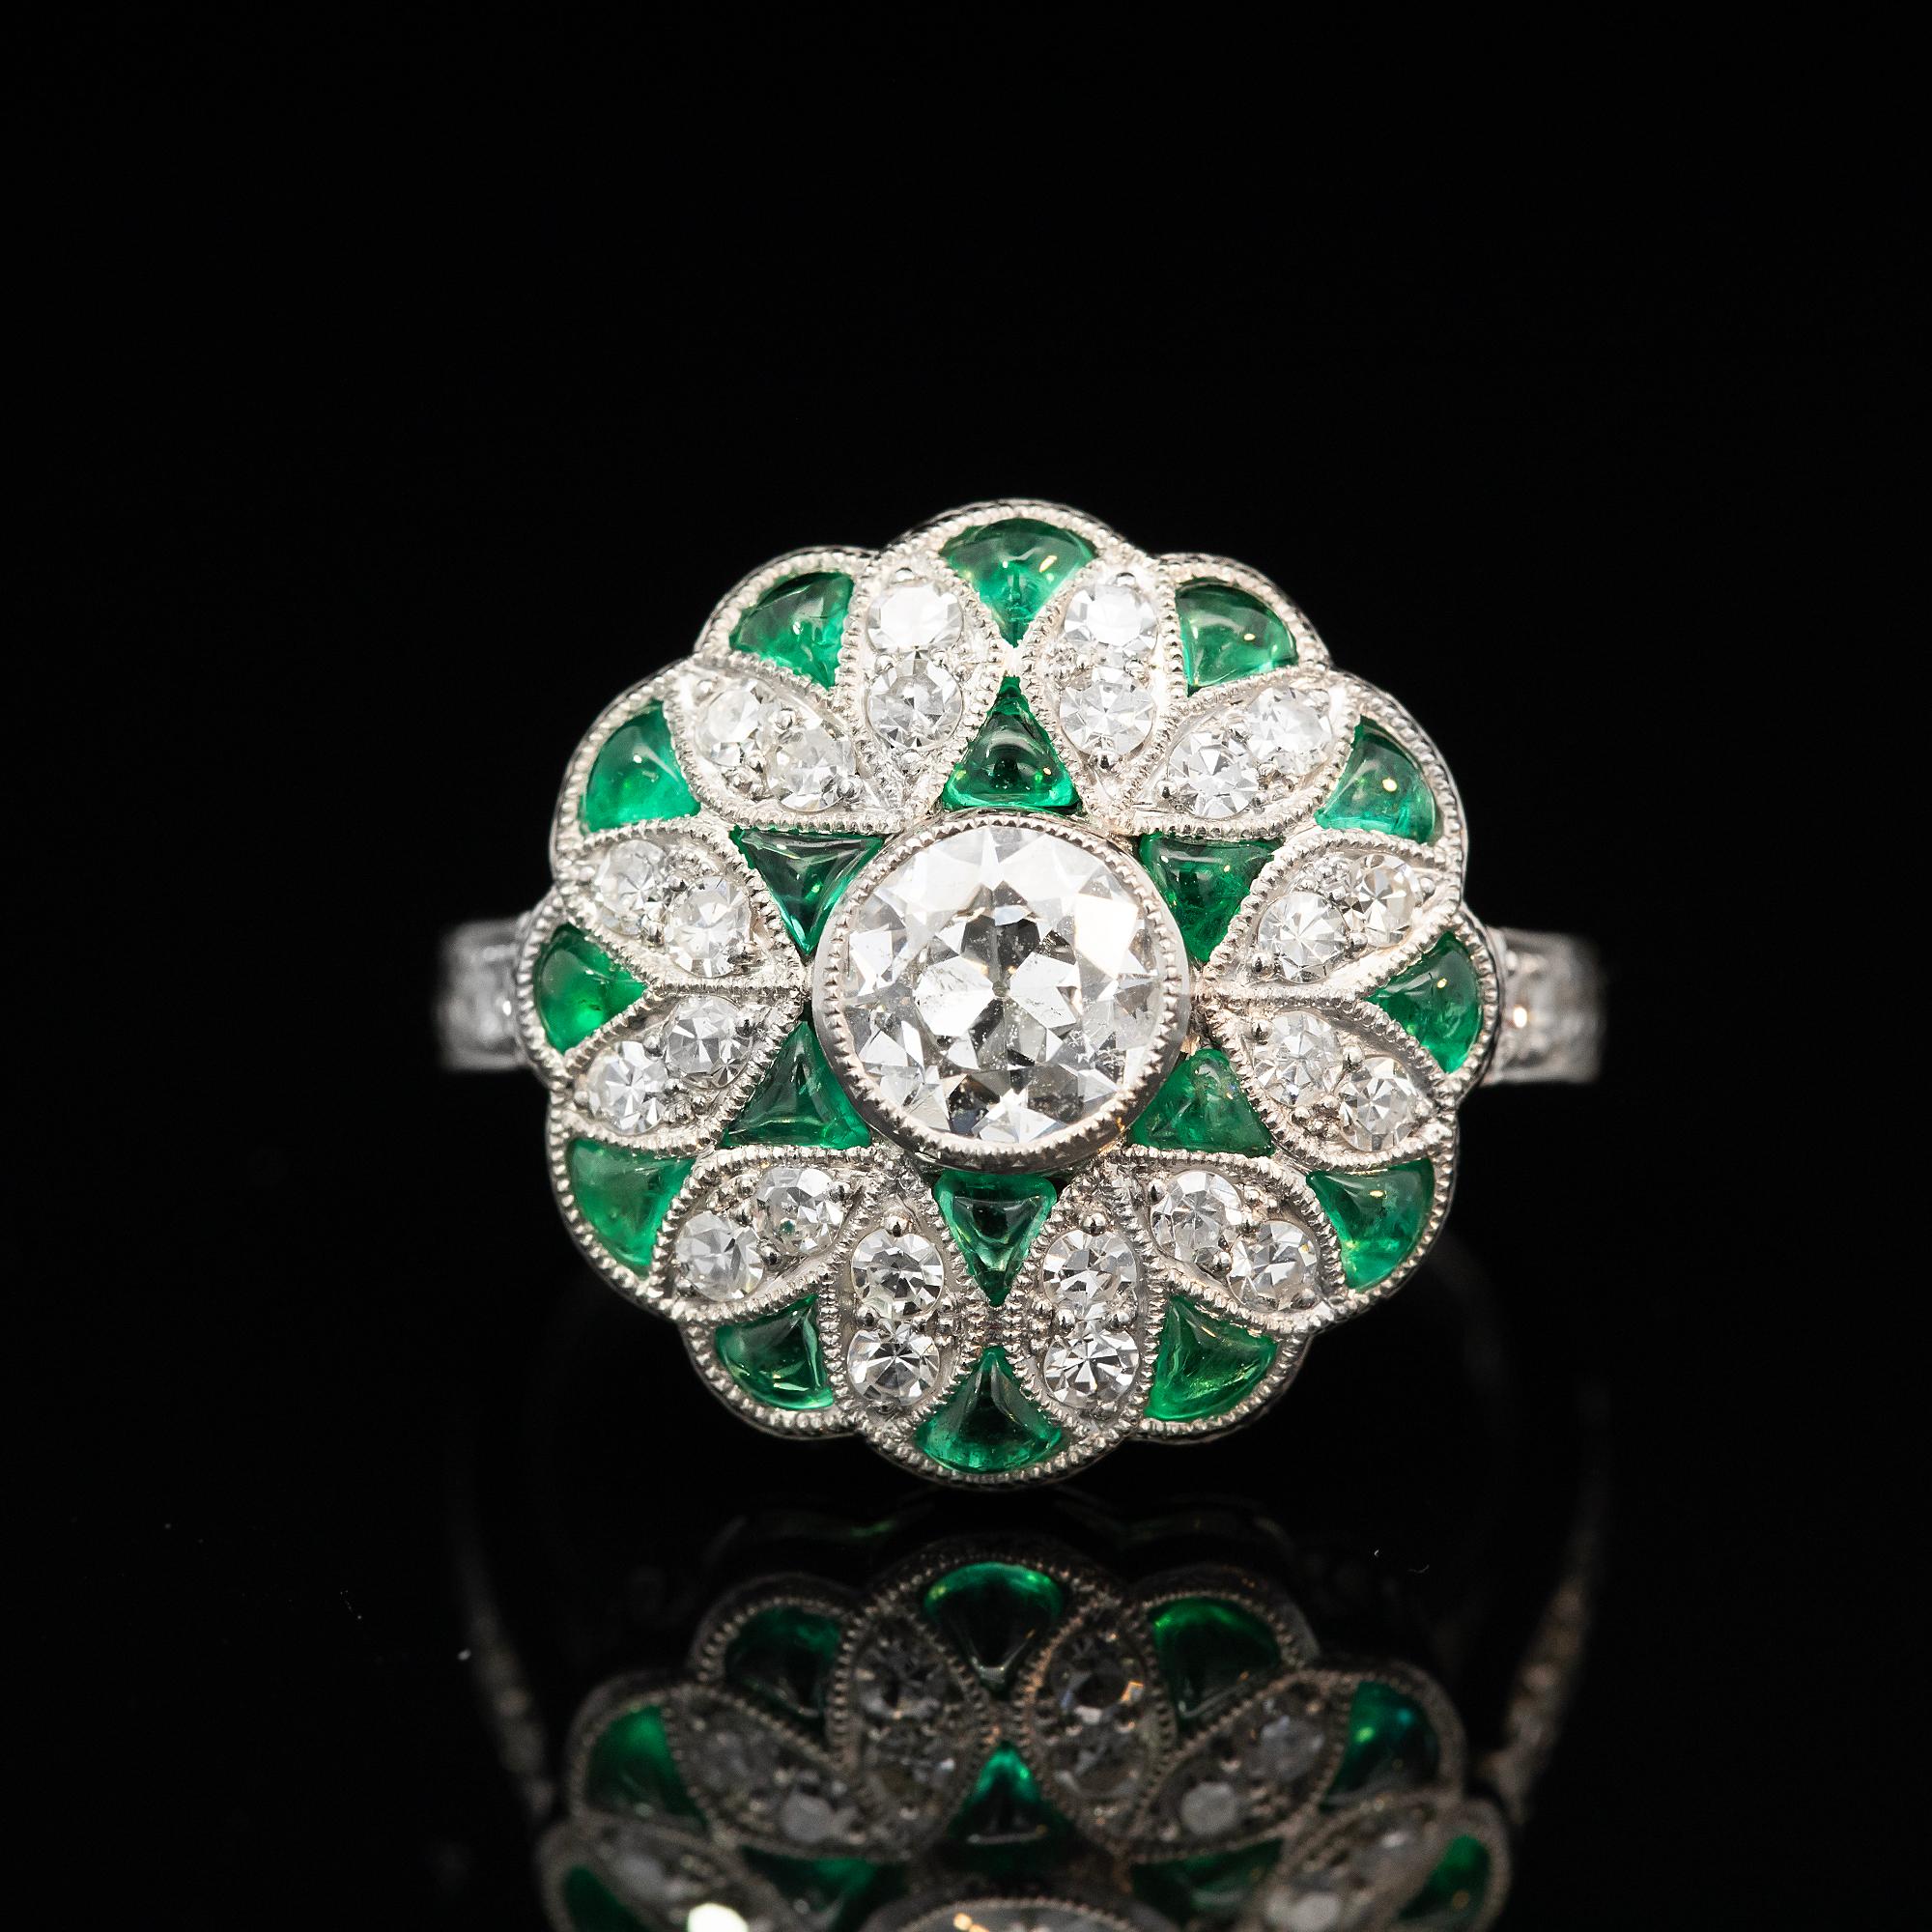 True its era, this Art Deco cluster ring makes an elegant statement piece. Featuring grain set early European cut and single cut diamonds with beautiful green emeralds.

Diamond: One early European cut, I-J colour, I1 material, estimated weight